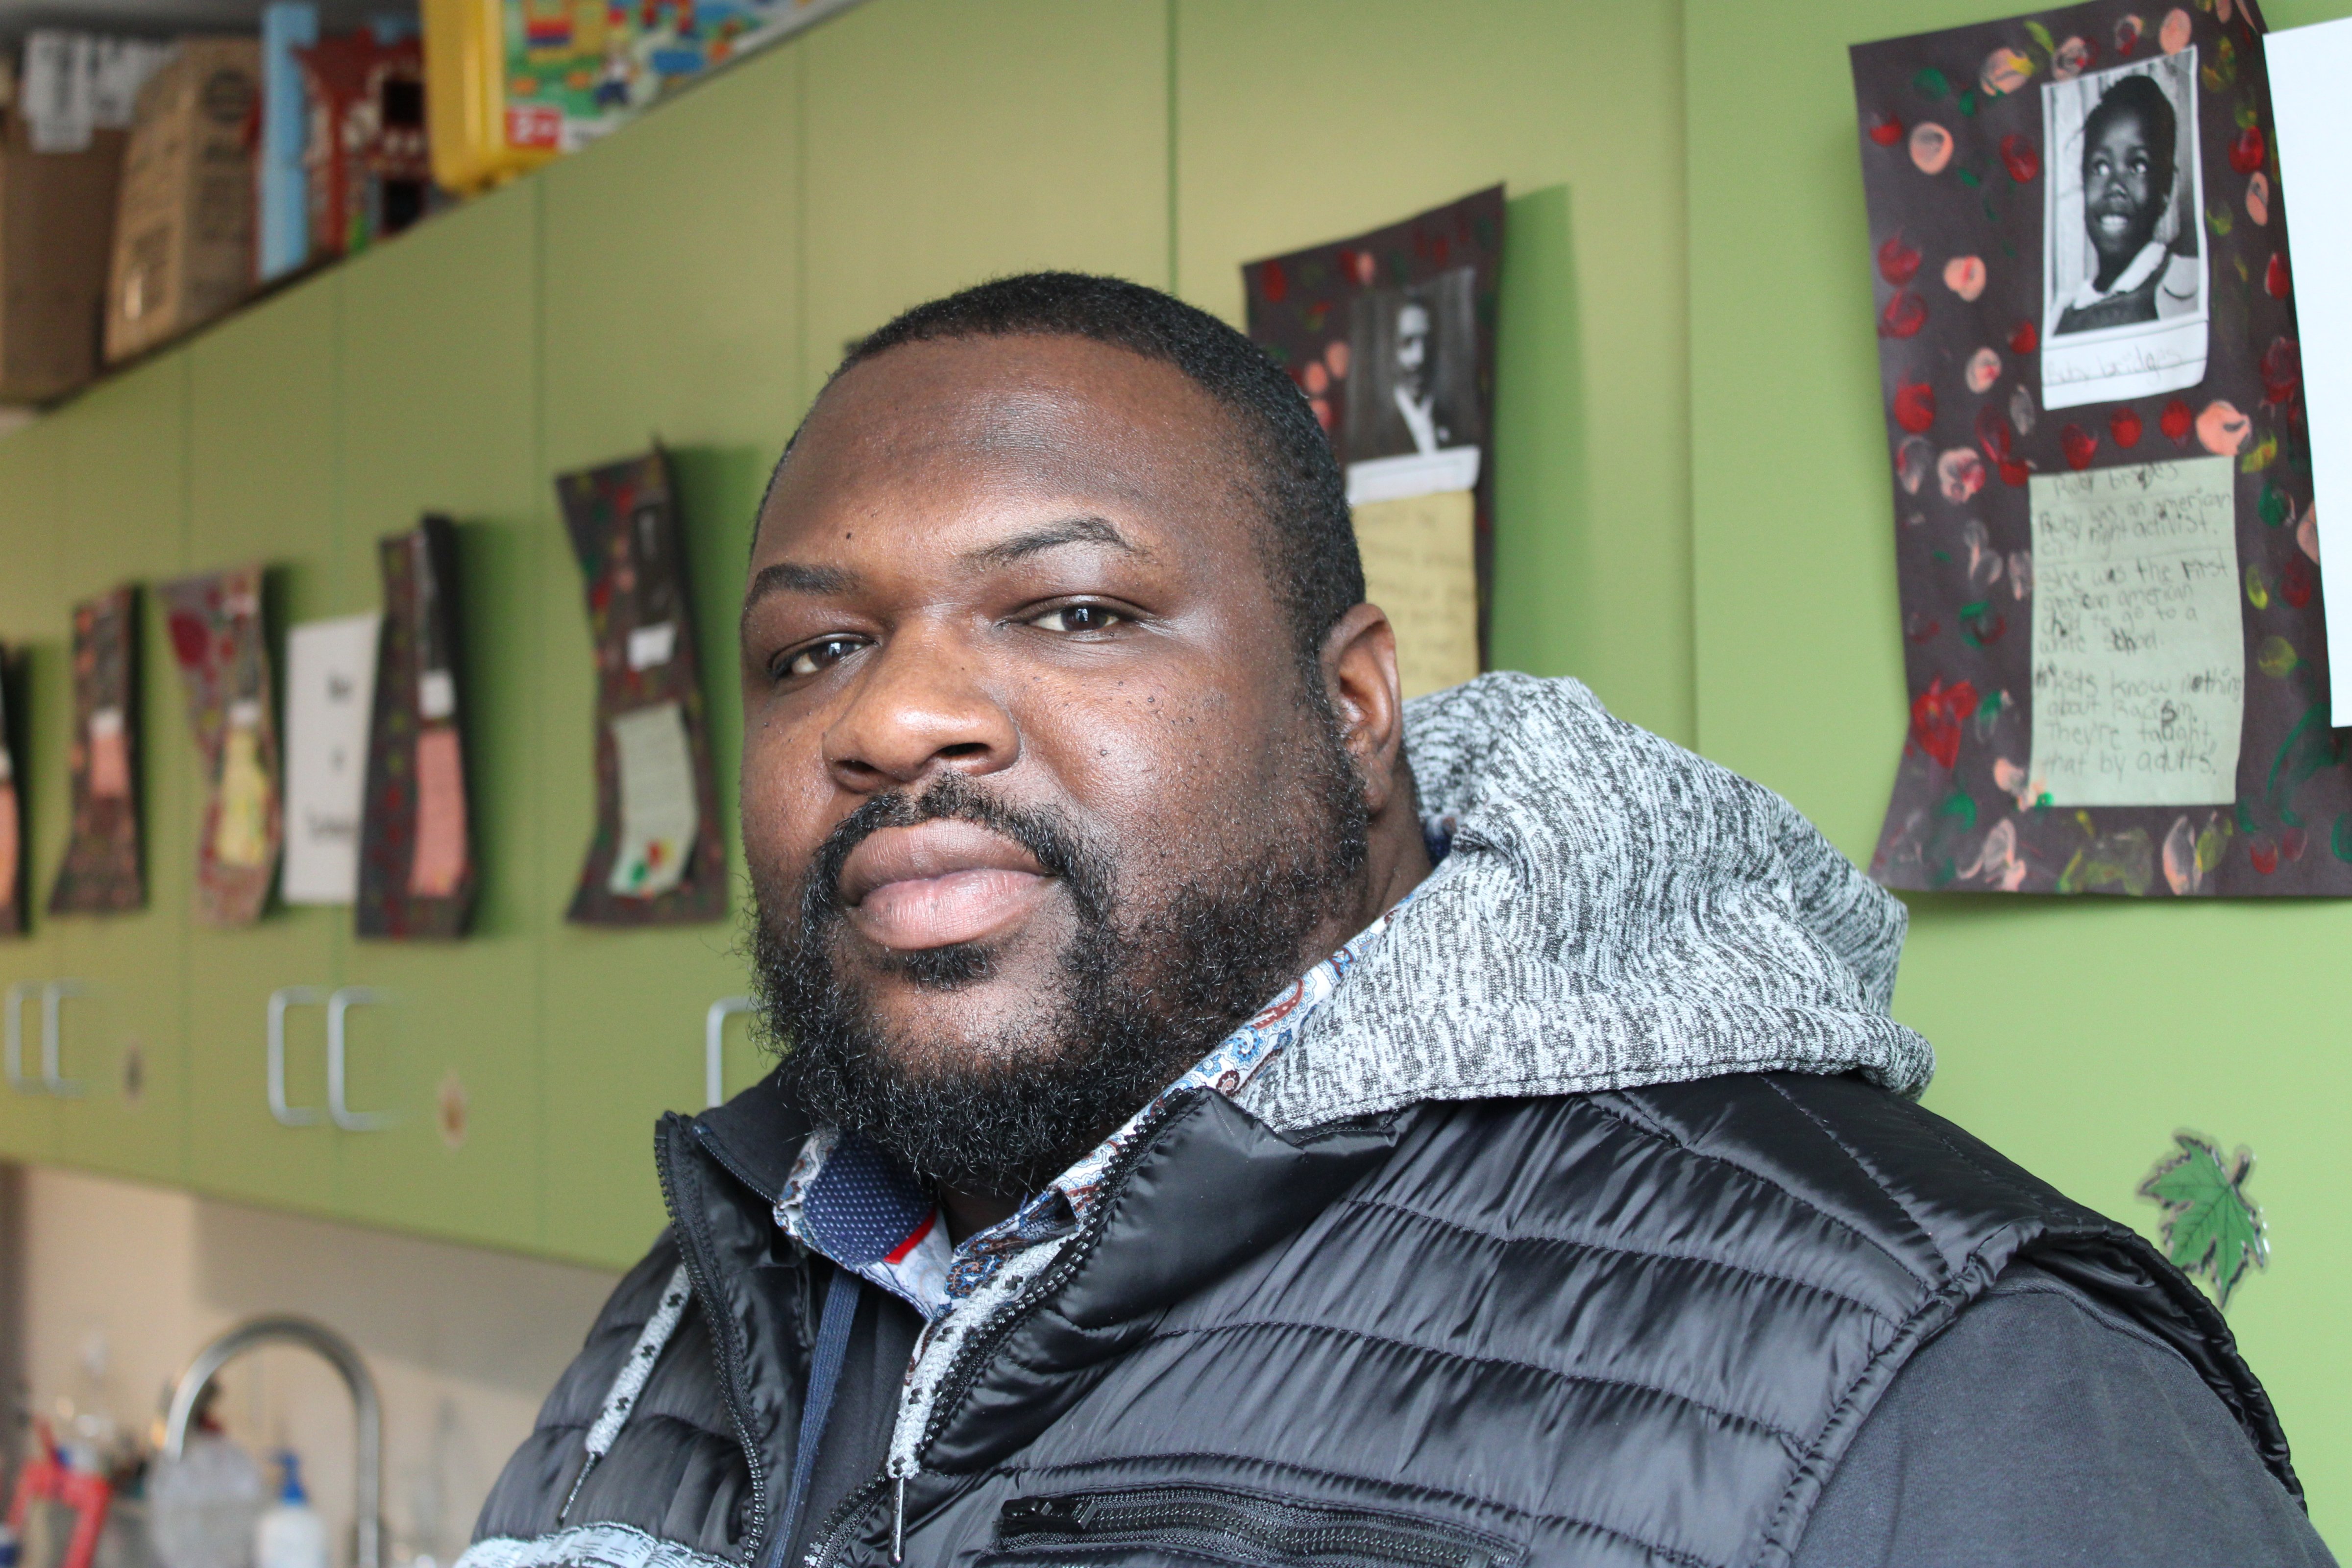 In his work with Black teenagers, pastor and mental health caseworker Darnell Hill teaches an unofficial guide to what he calls “living while Black.” Though many Black families have their own sets of rules to navigate others’ racist assumptions, Hill says he hopes that following his “do’s and don’ts” will allow kids to survive as unscathed as possible to realize their life ambitions. (Cara Anthony—KHN)